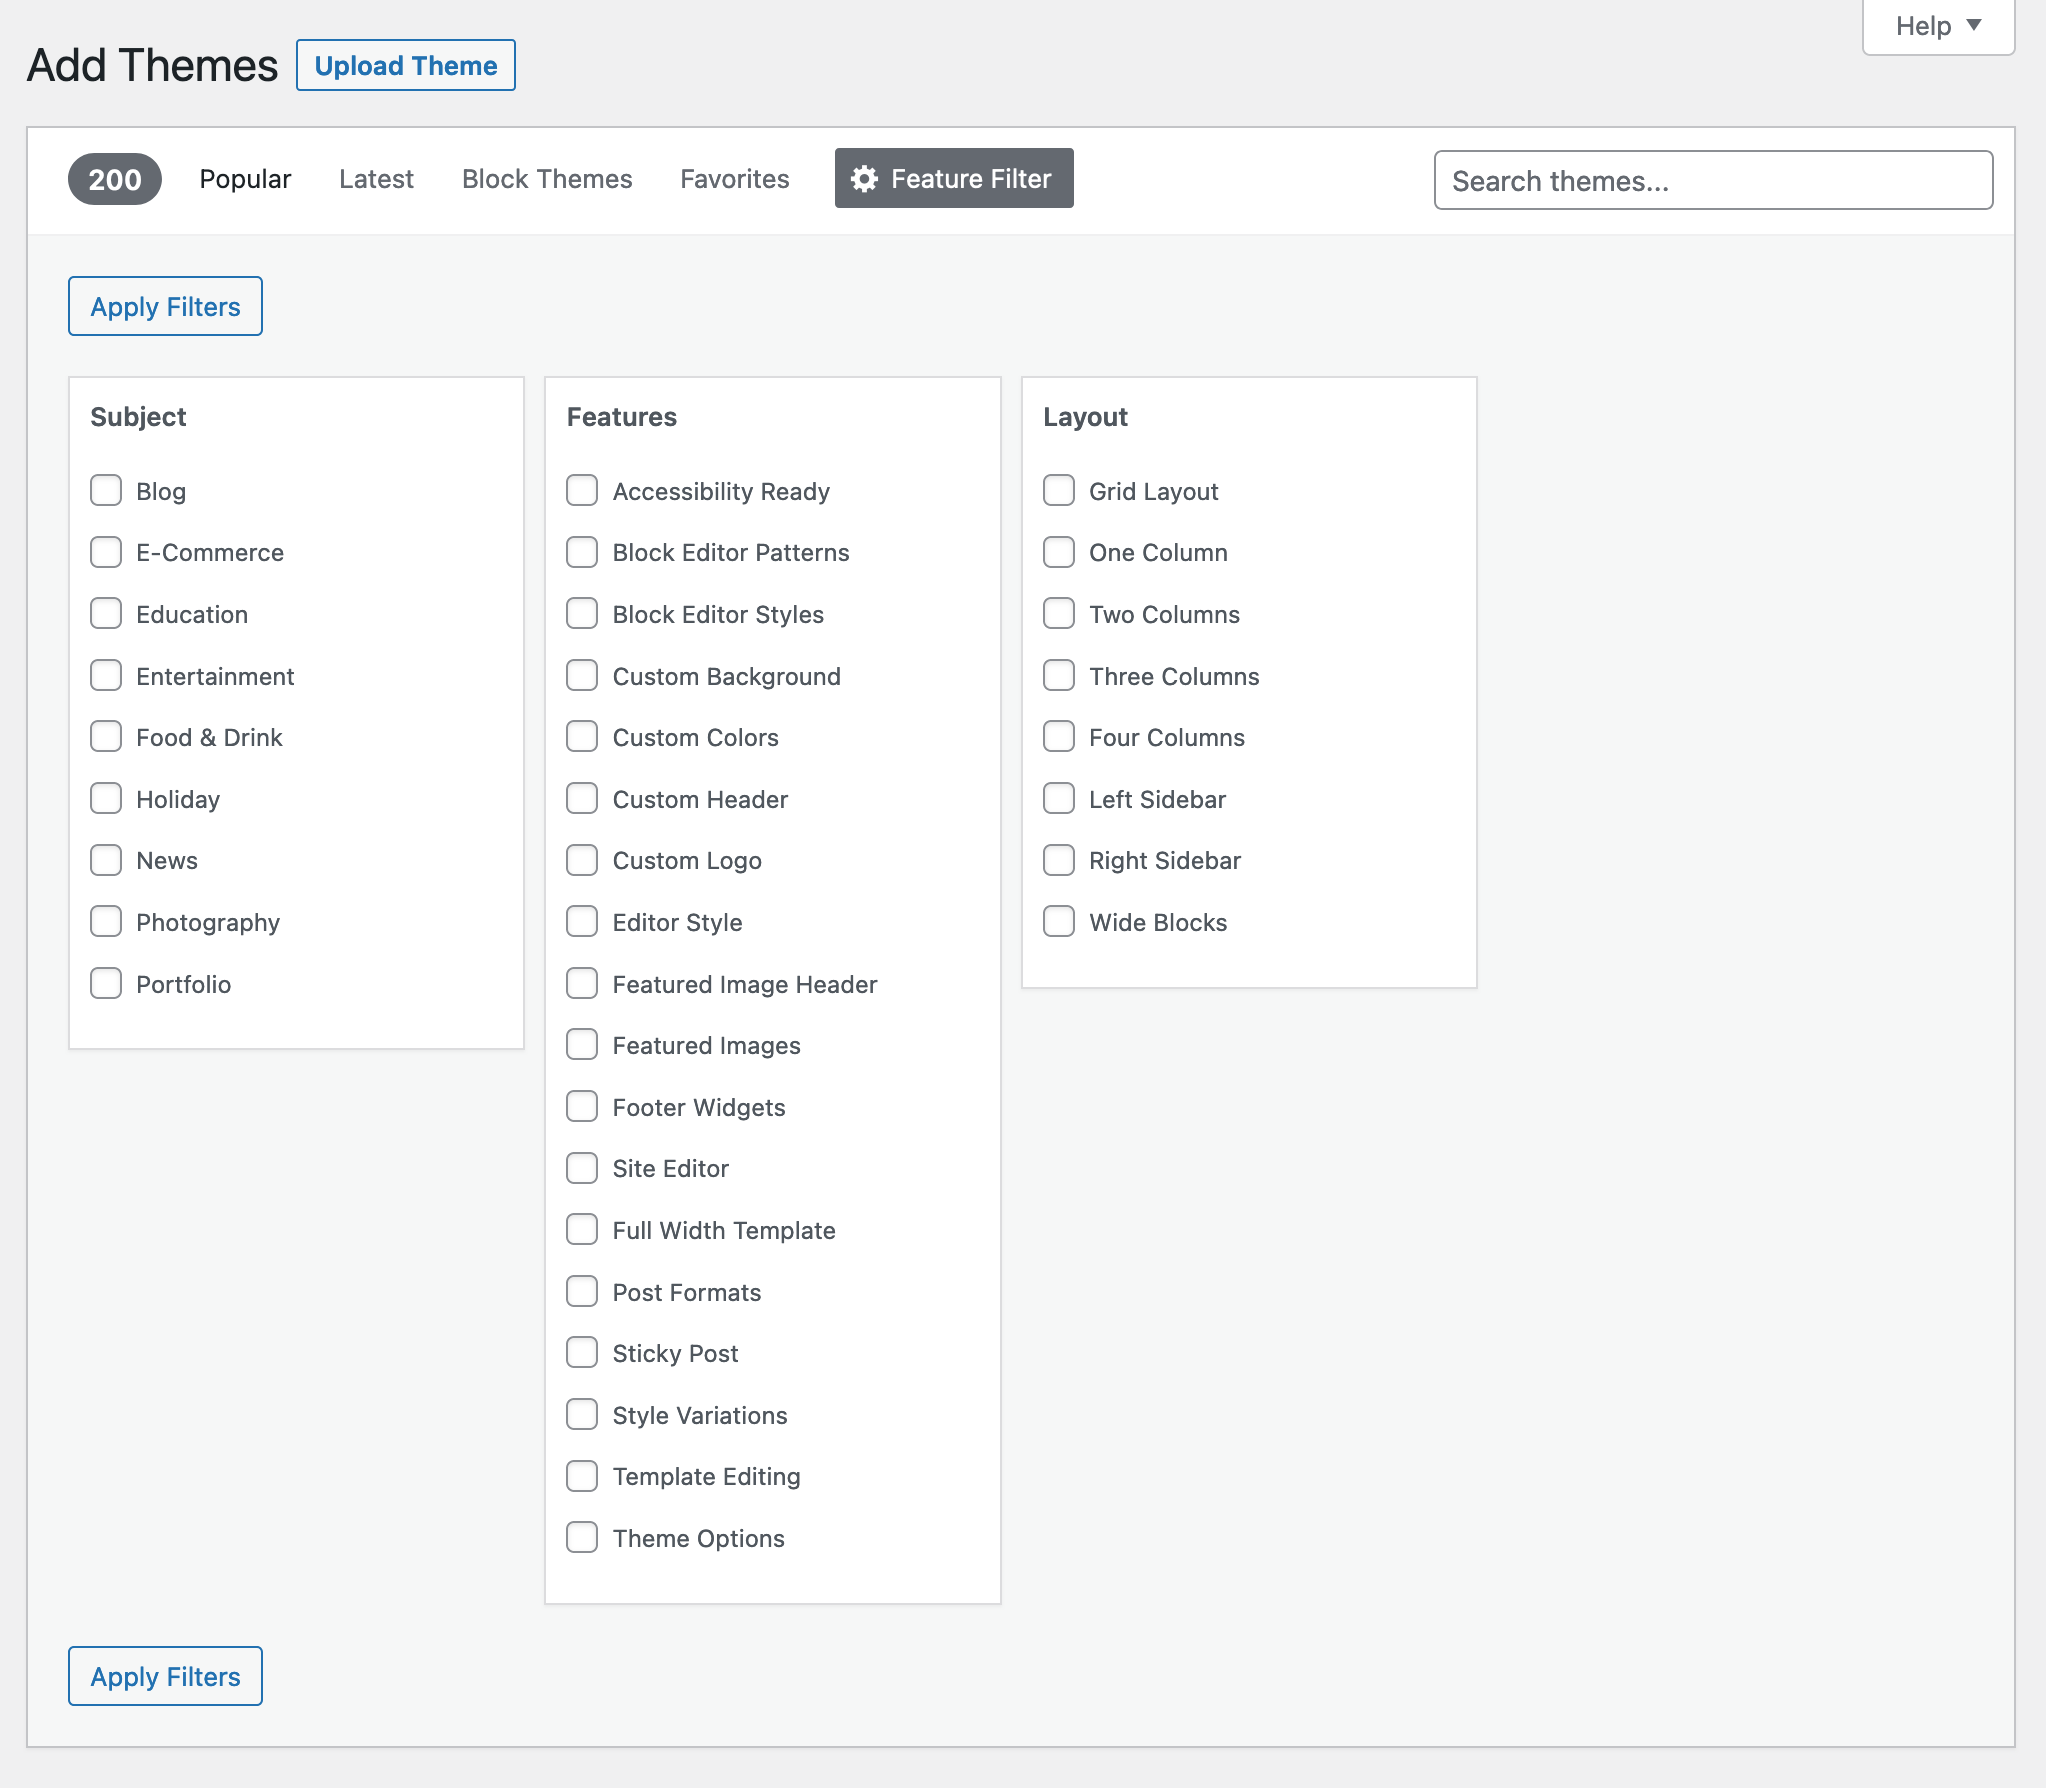 WordPress allows you to filter themes by features.